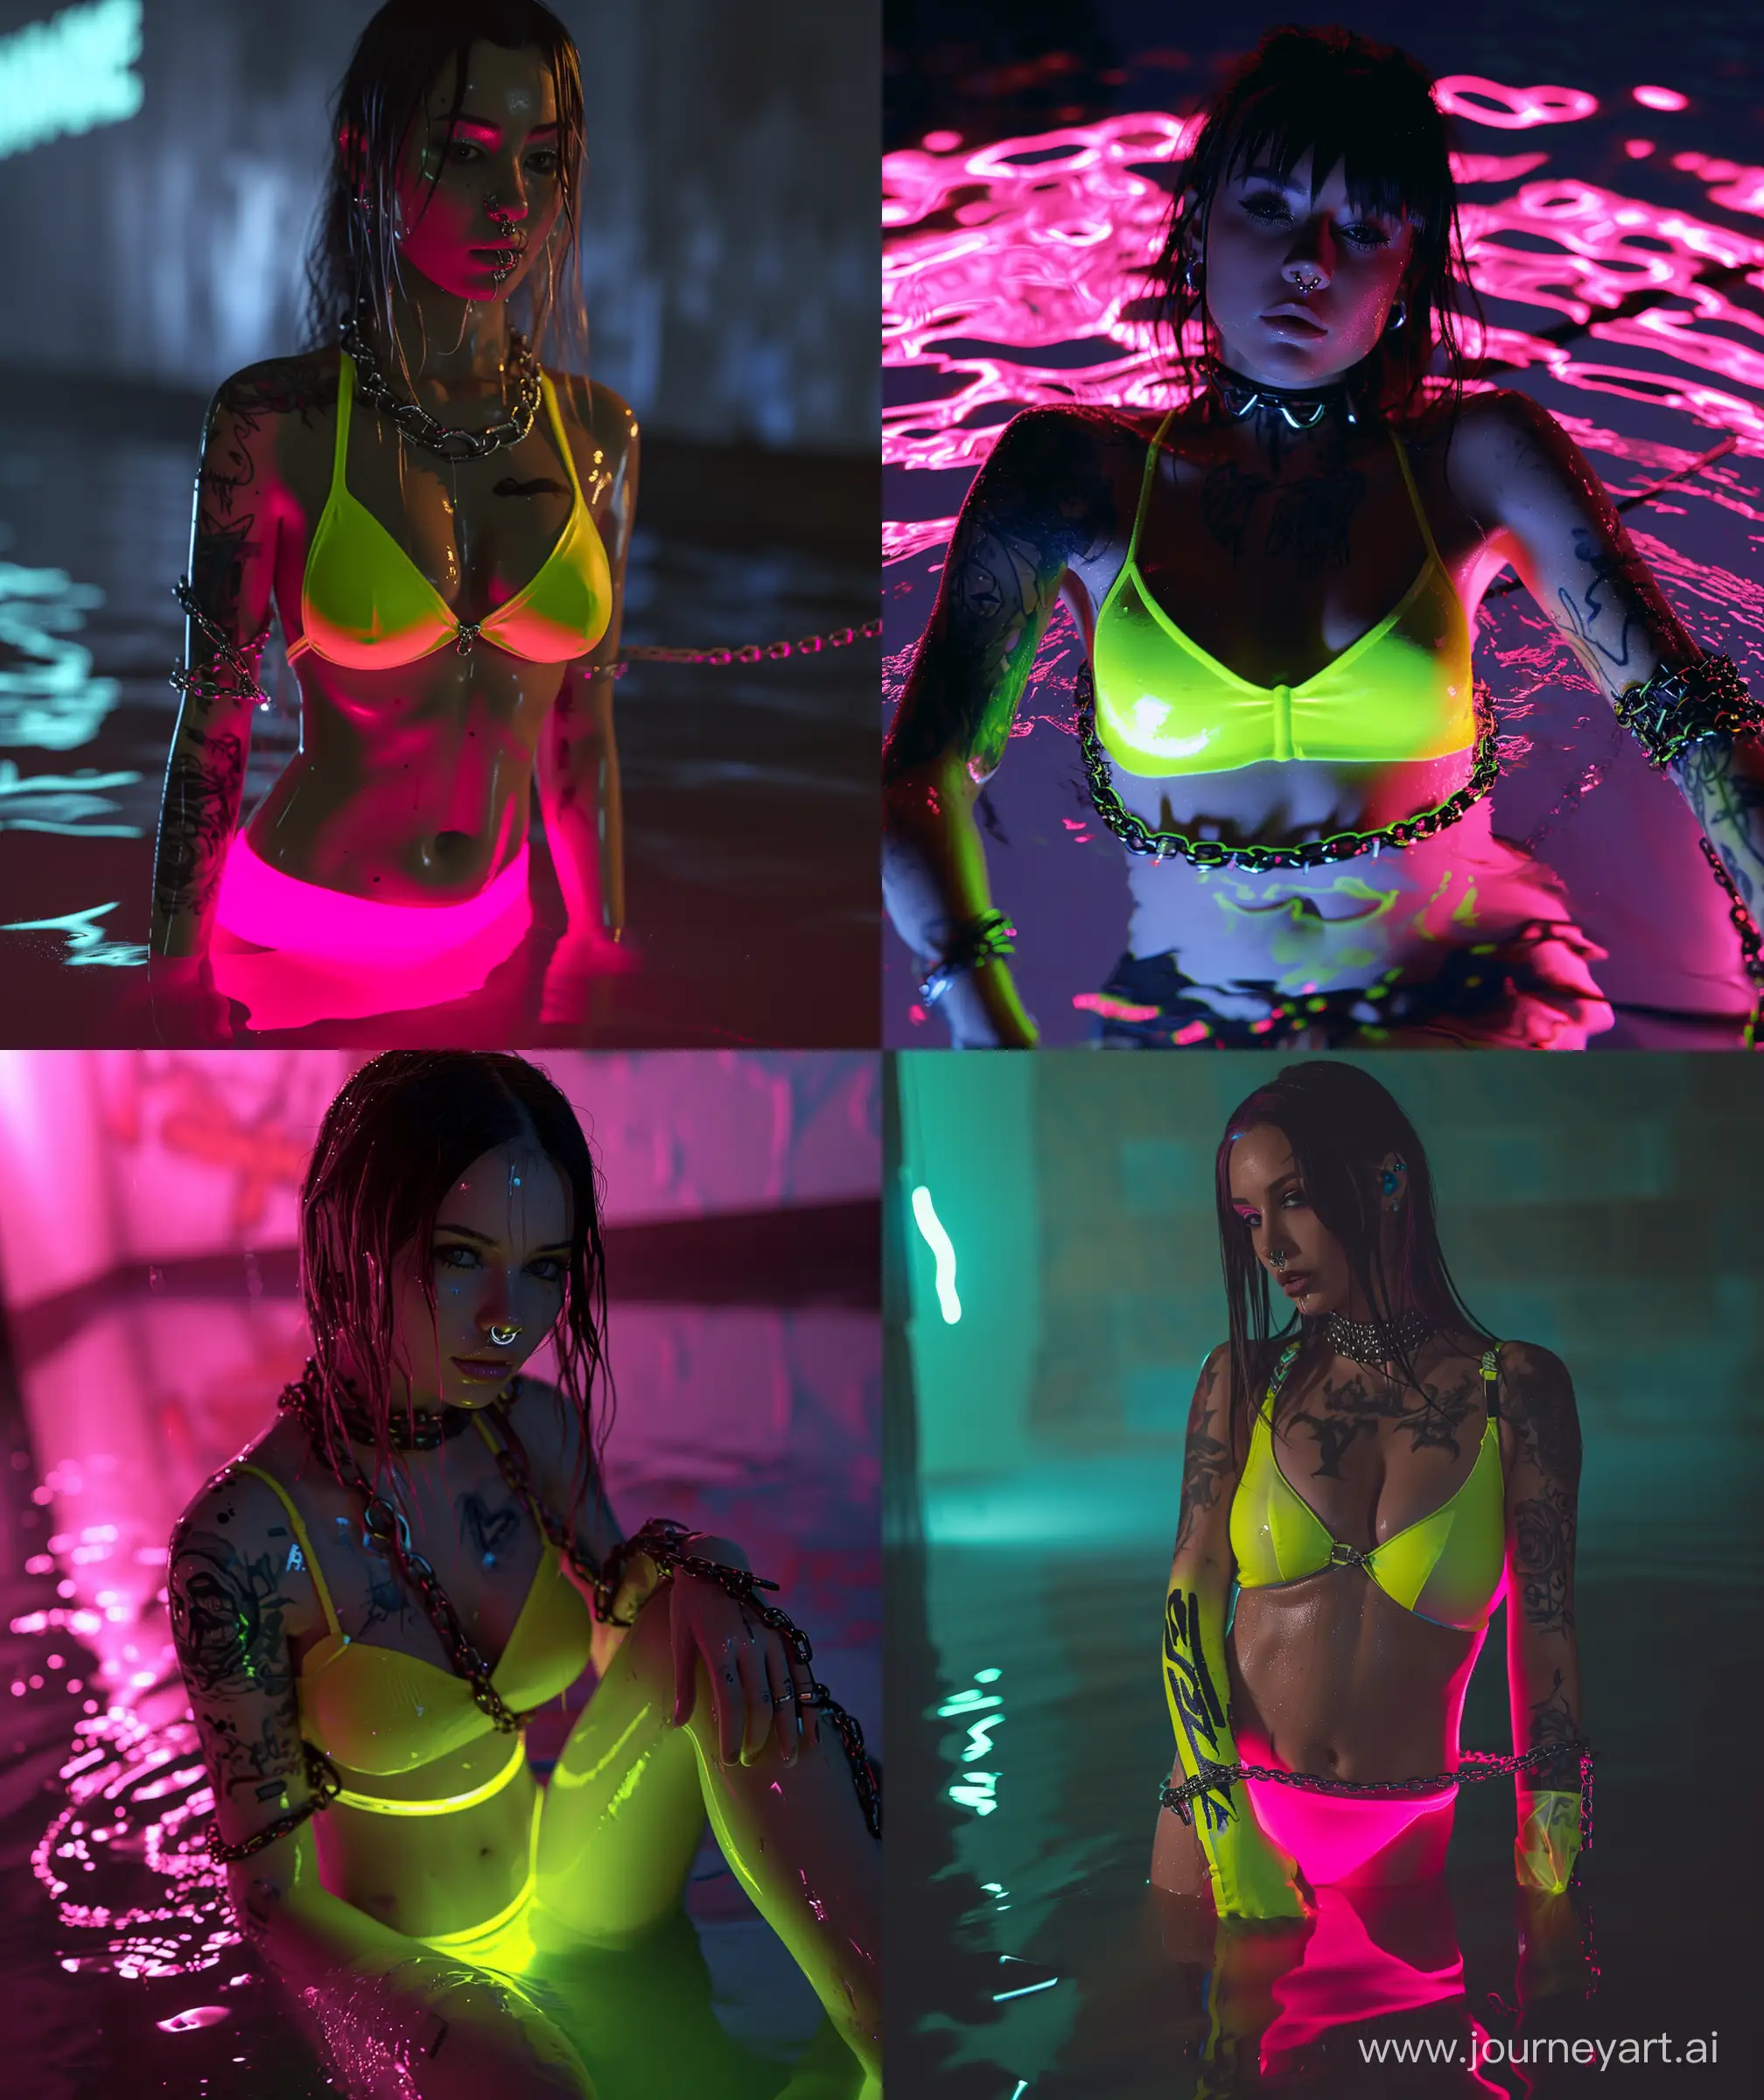 Sultry-Cyberpunk-Neon-Girl-with-Chain-Binding-in-Reflective-Waters